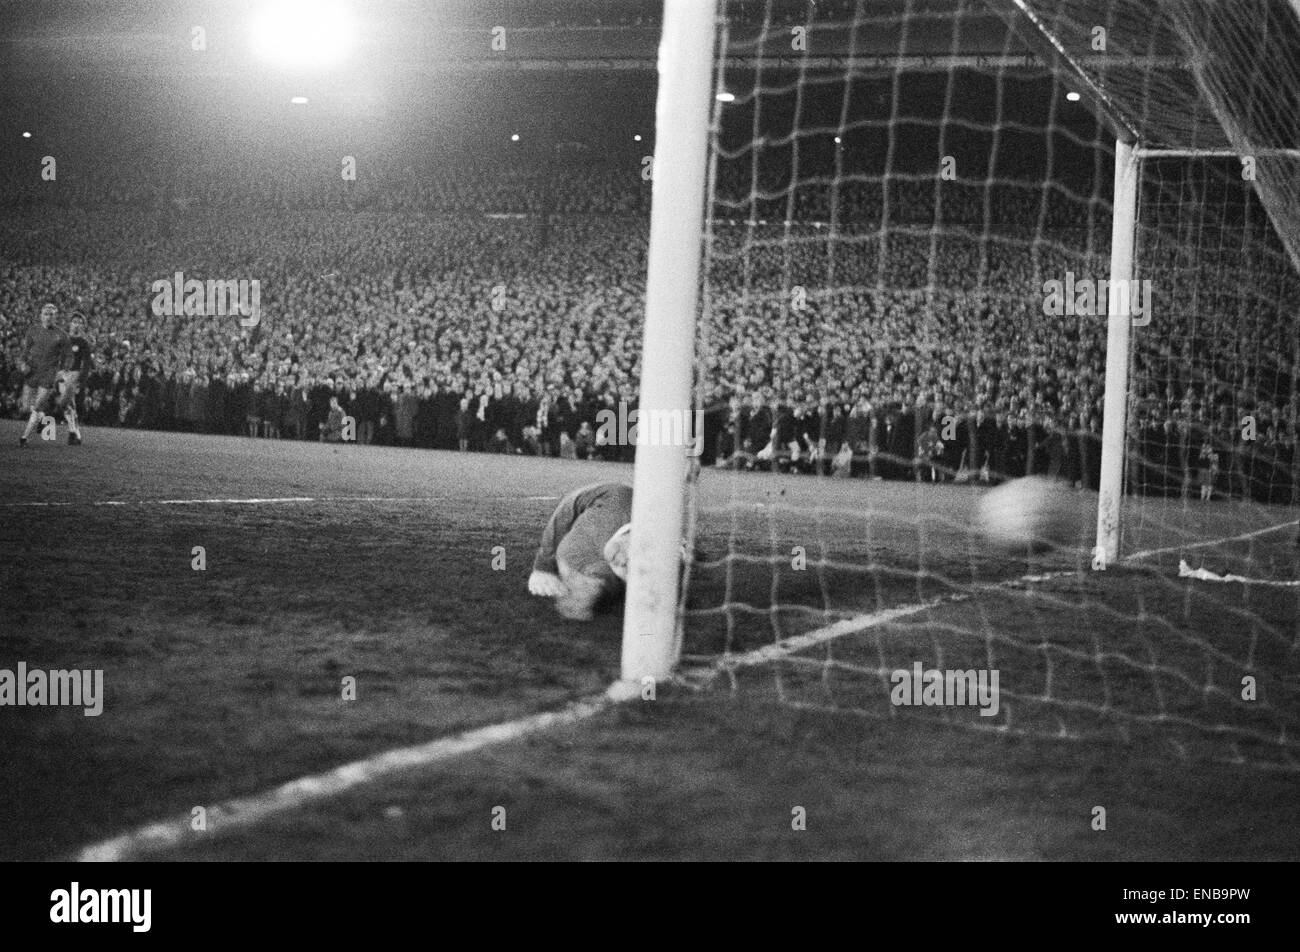 FA Cup Fifth round replay. Leeds United 1 v. Sunderland 1. Record attendance of nearly 58, 000 fans at Elland Road which led to barrier collapses and fans being injured on the terraces. OPS Sunderland keeper Jimmy Montgomery dives to save a shot. 15th Mar Stock Photo